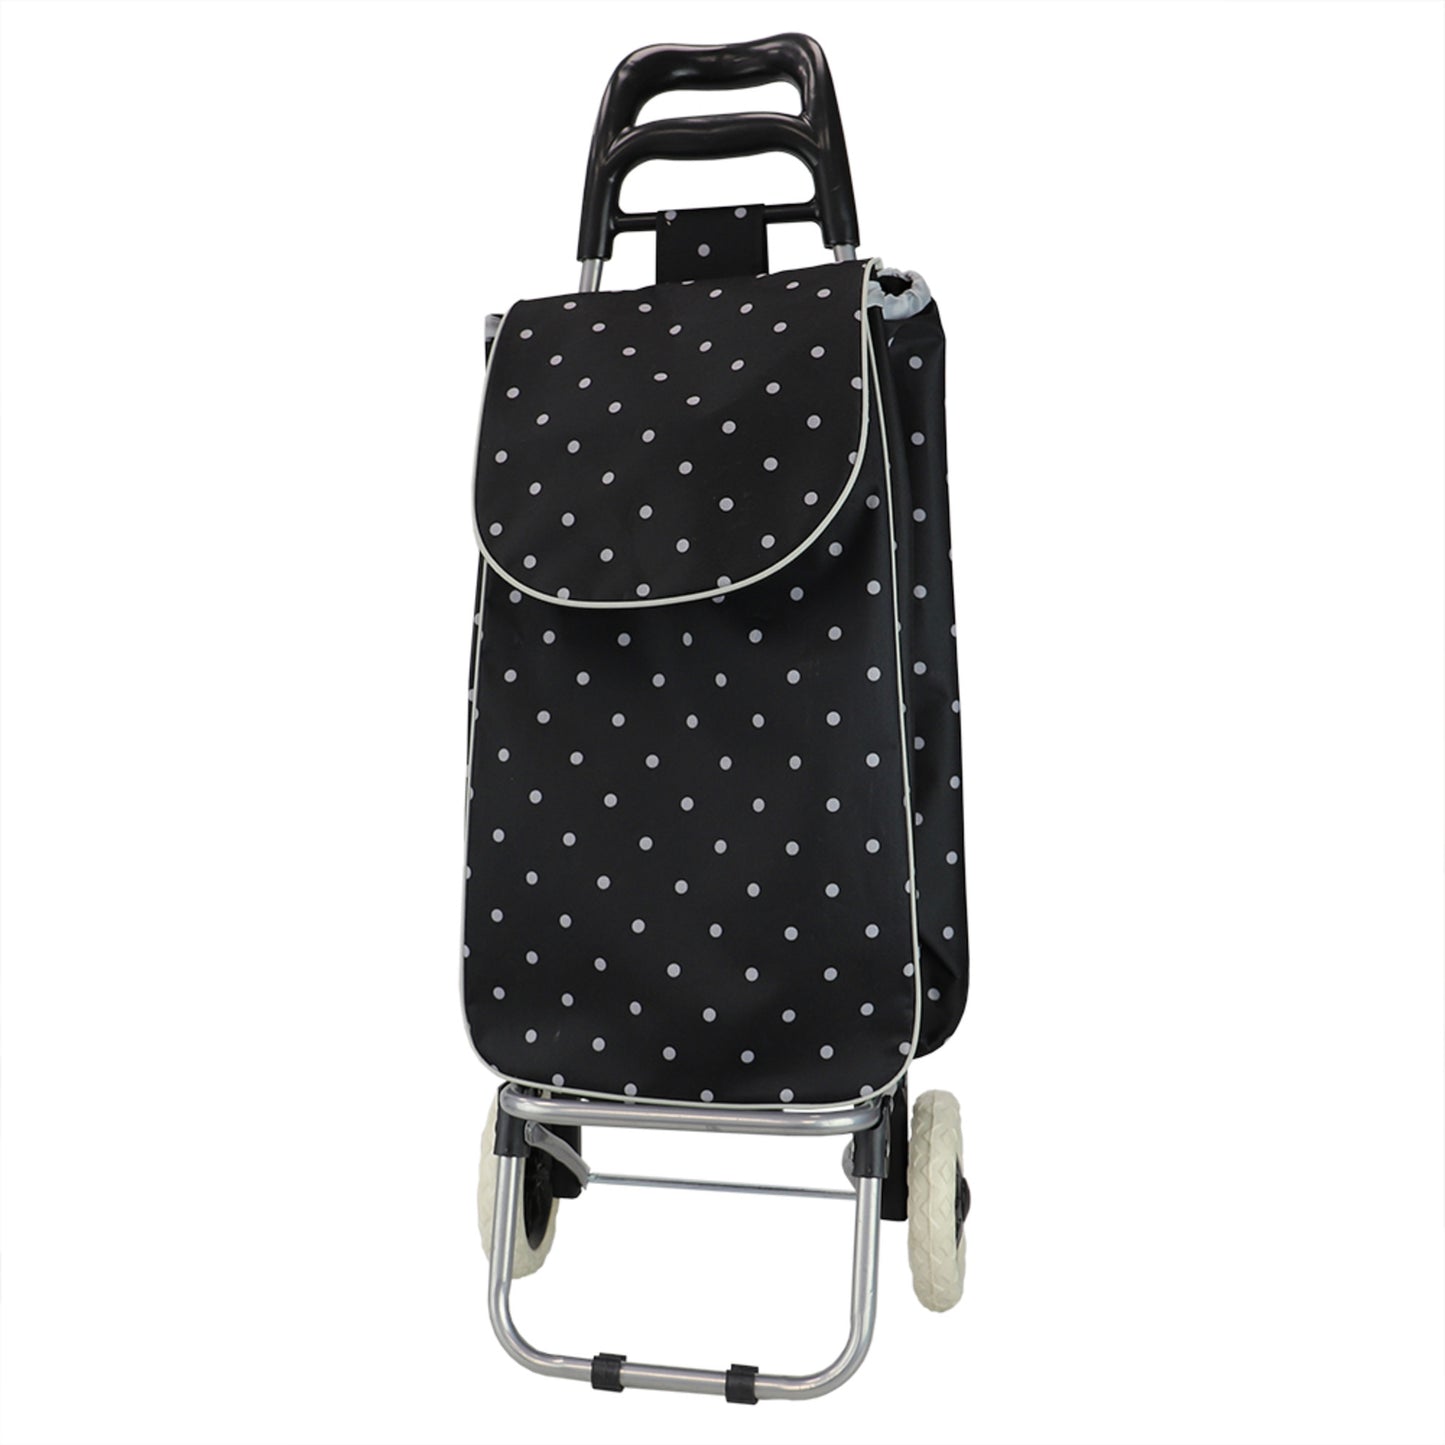 Home Basics Polka Dot Multi-Purpose Rolling Cart With Built-In Chair, Black - Black